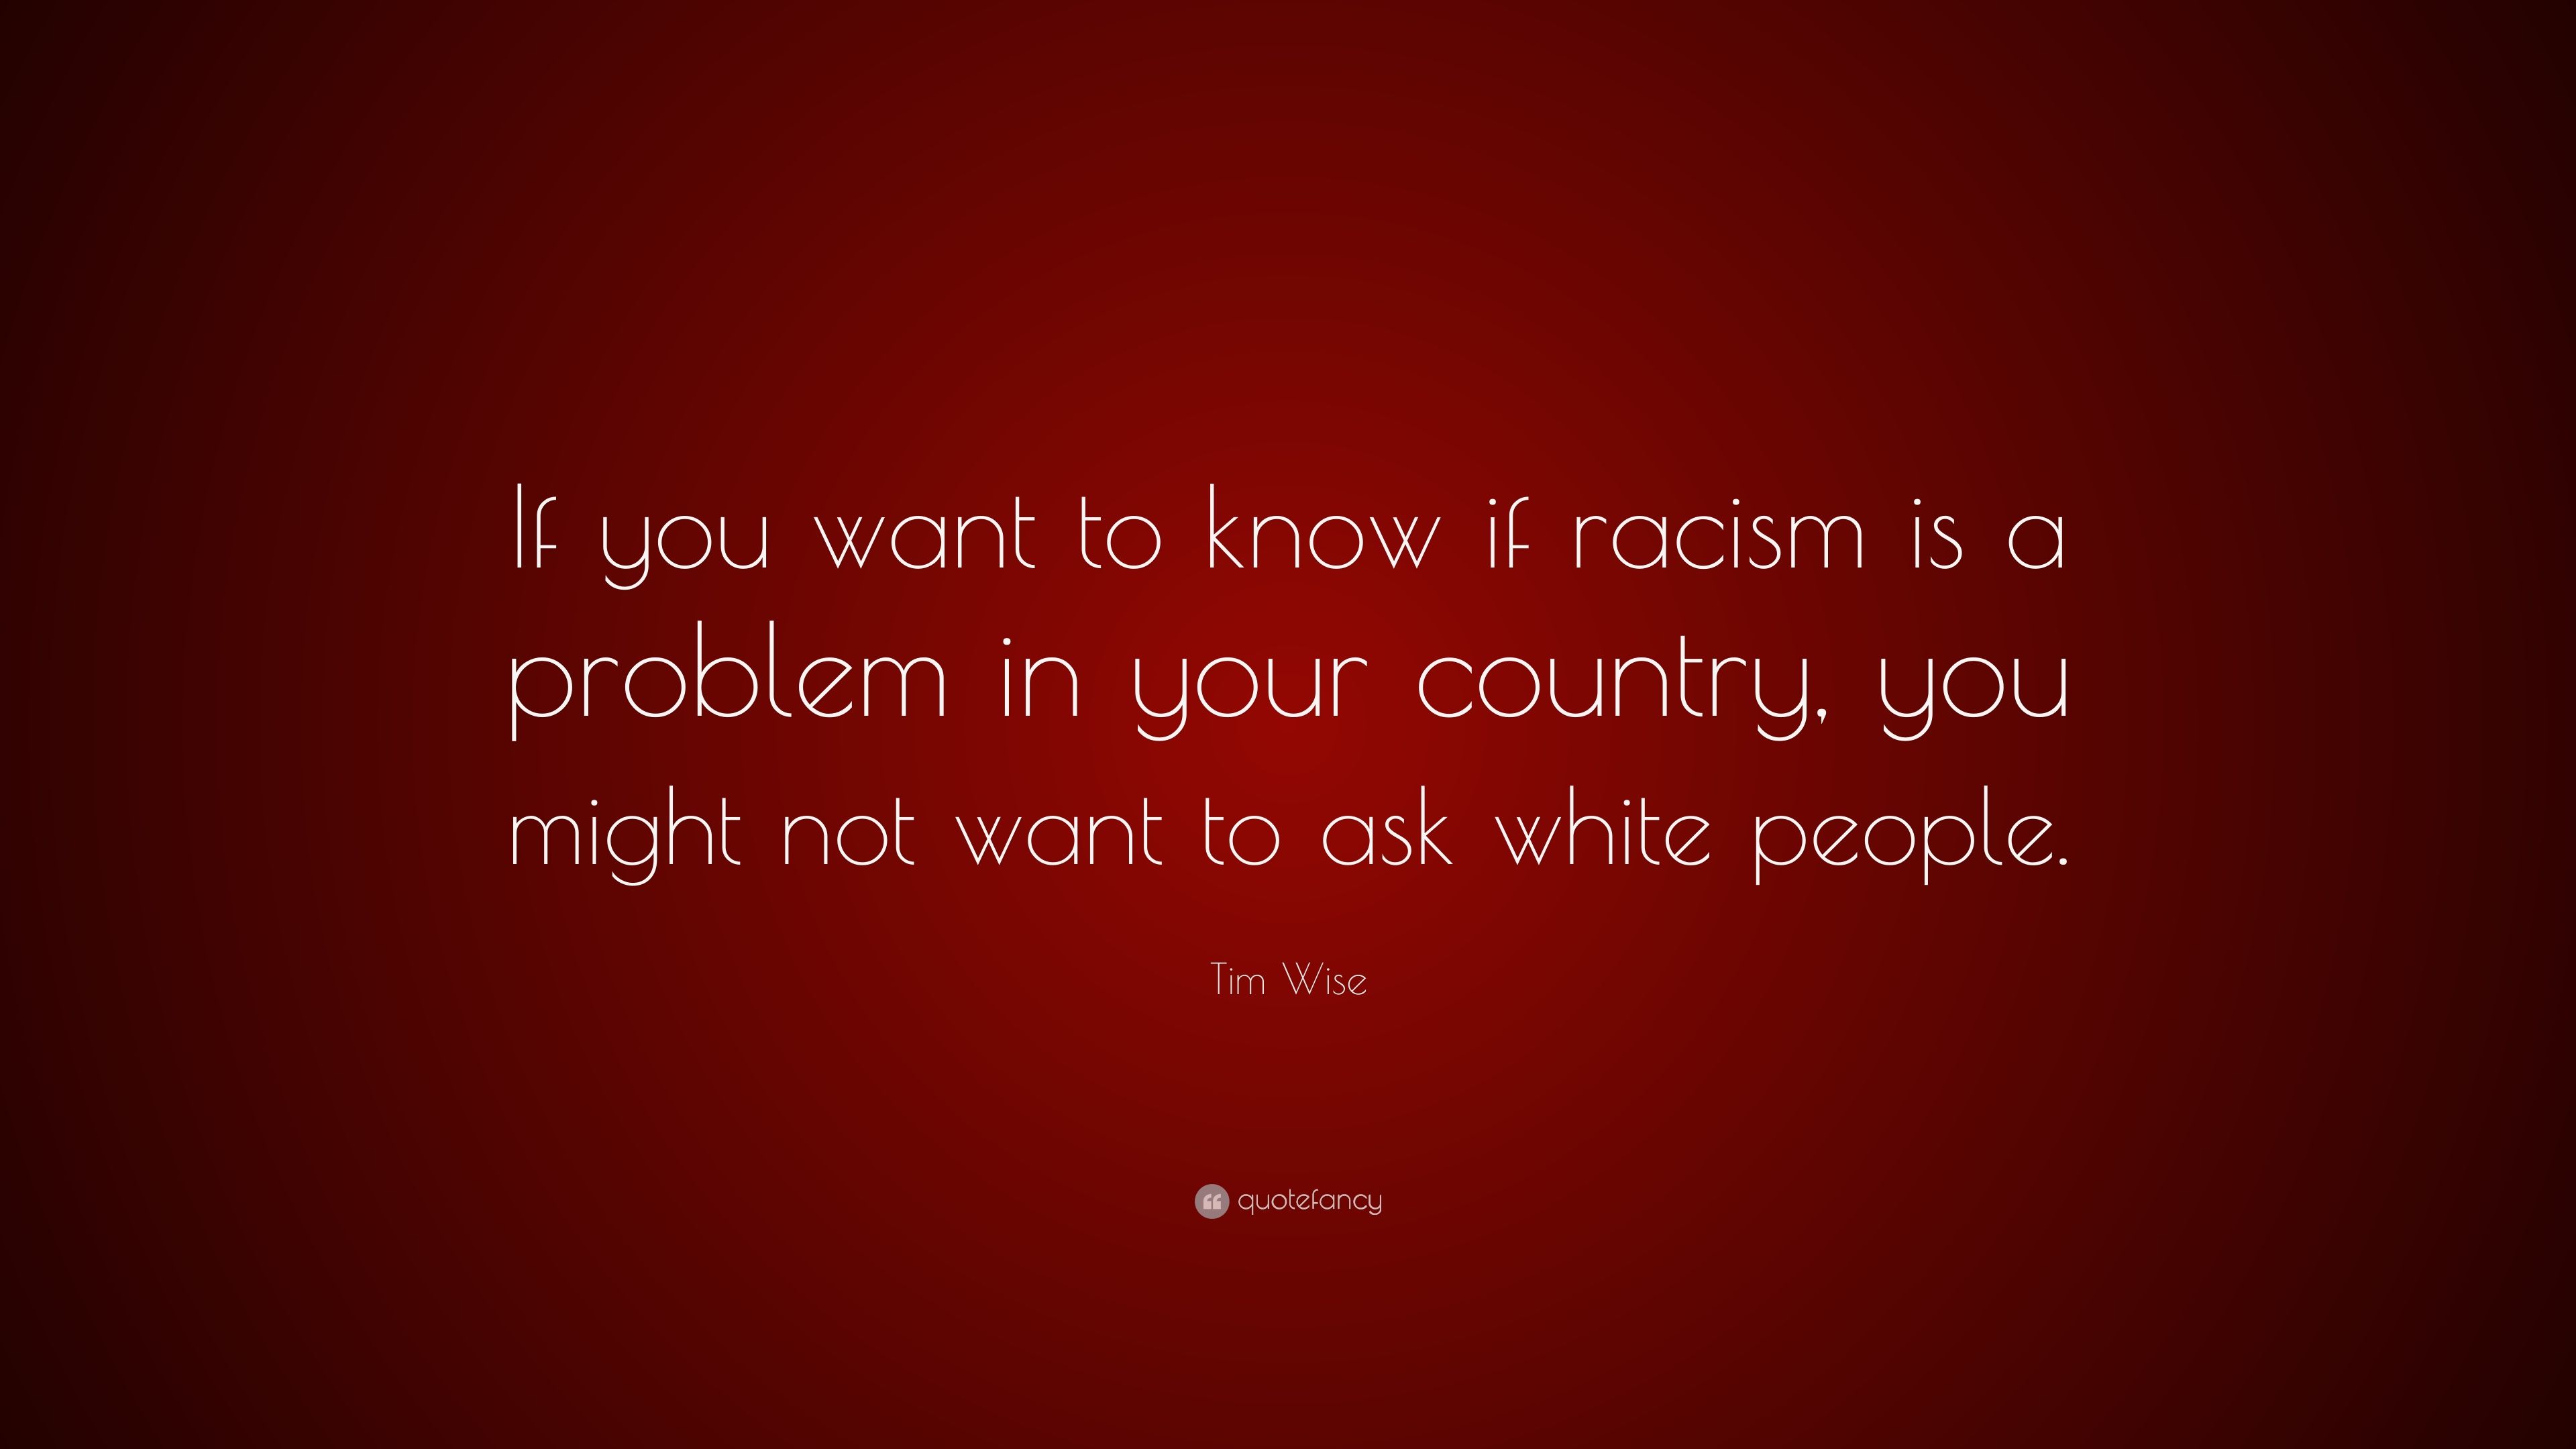 Tim Wise Quote: “If you want to know if racism is a problem